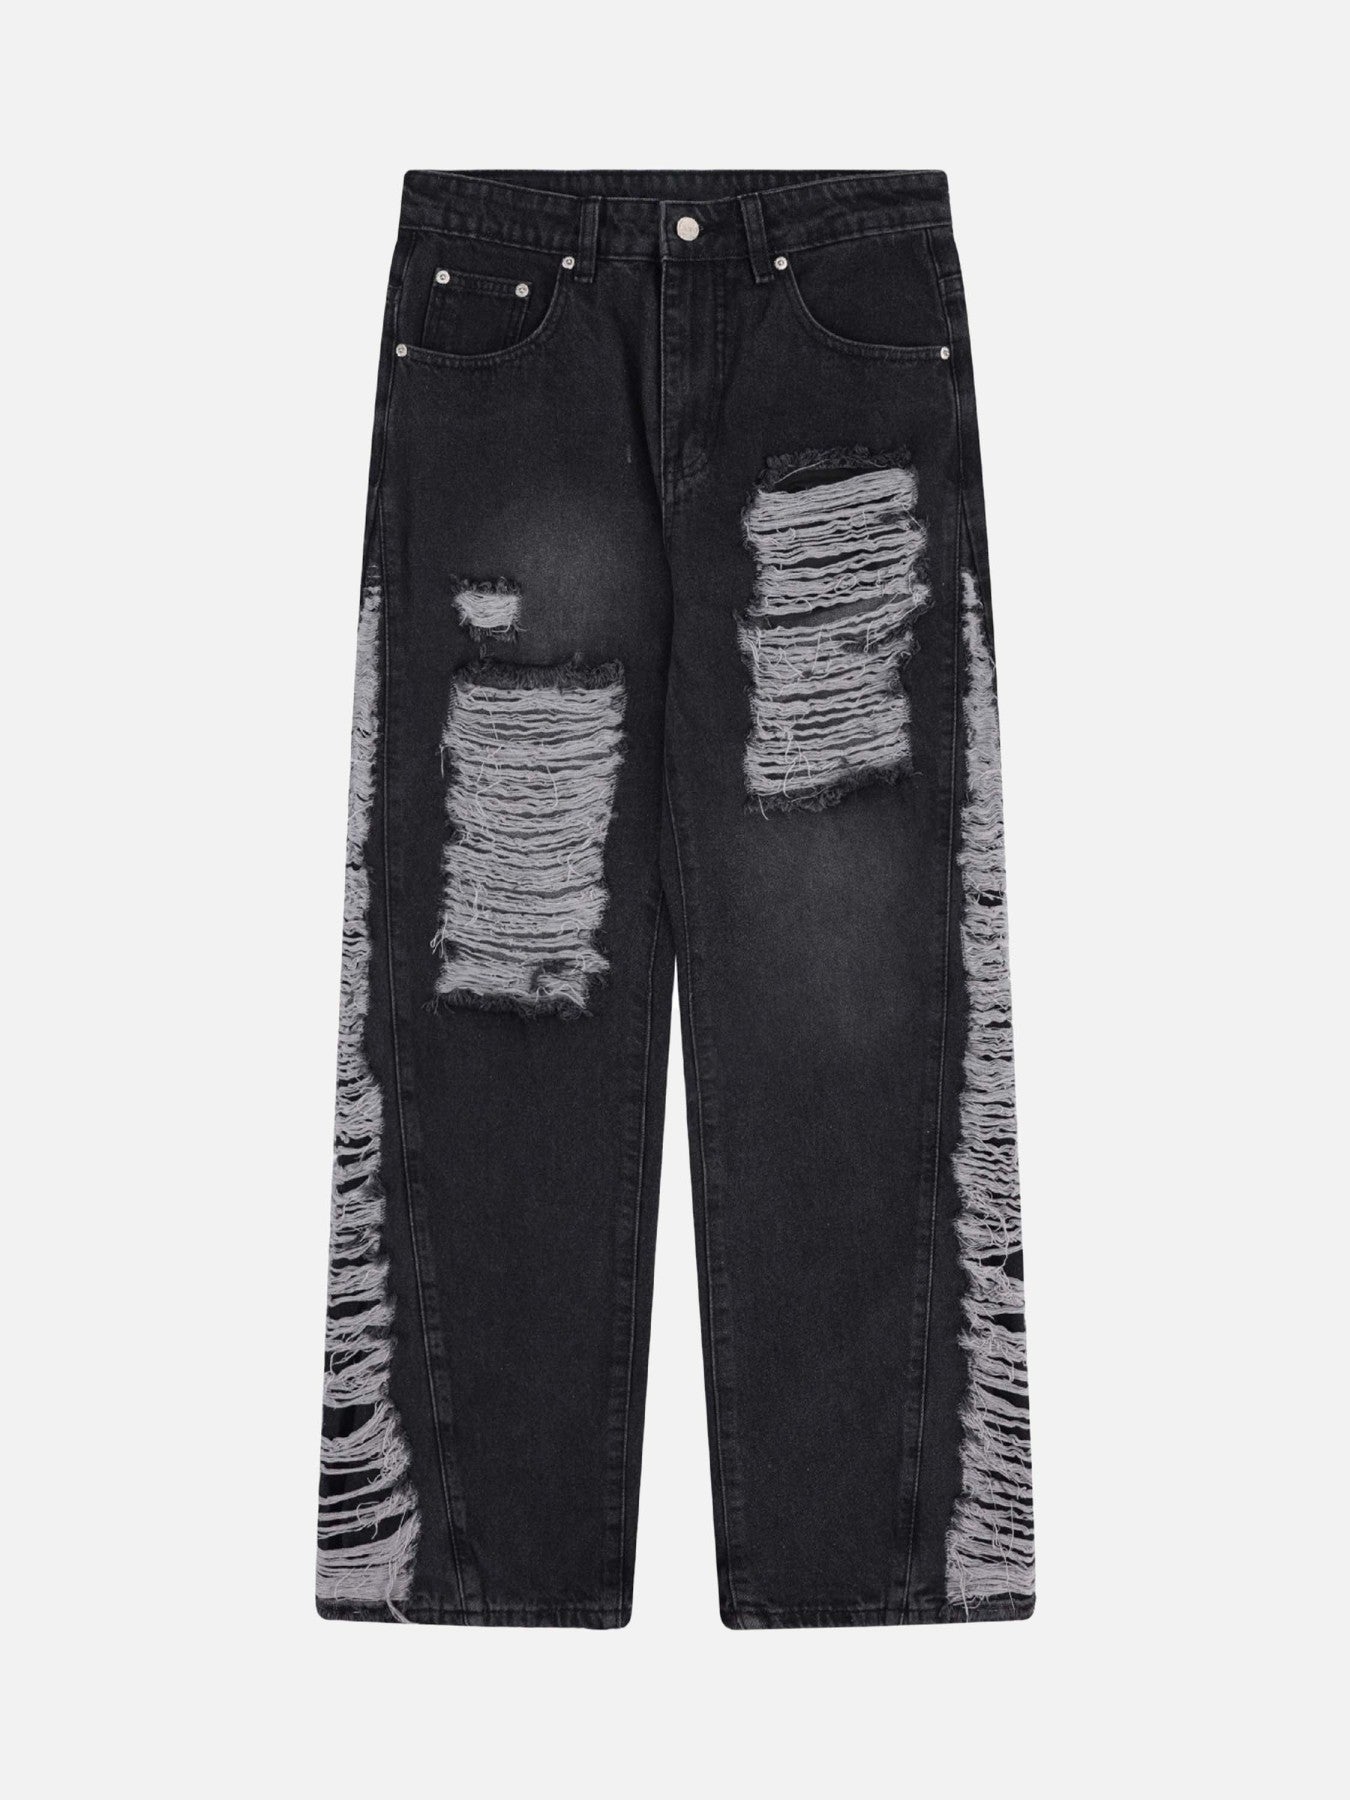 The Supermade Washed And Distressed Ripped Jeans